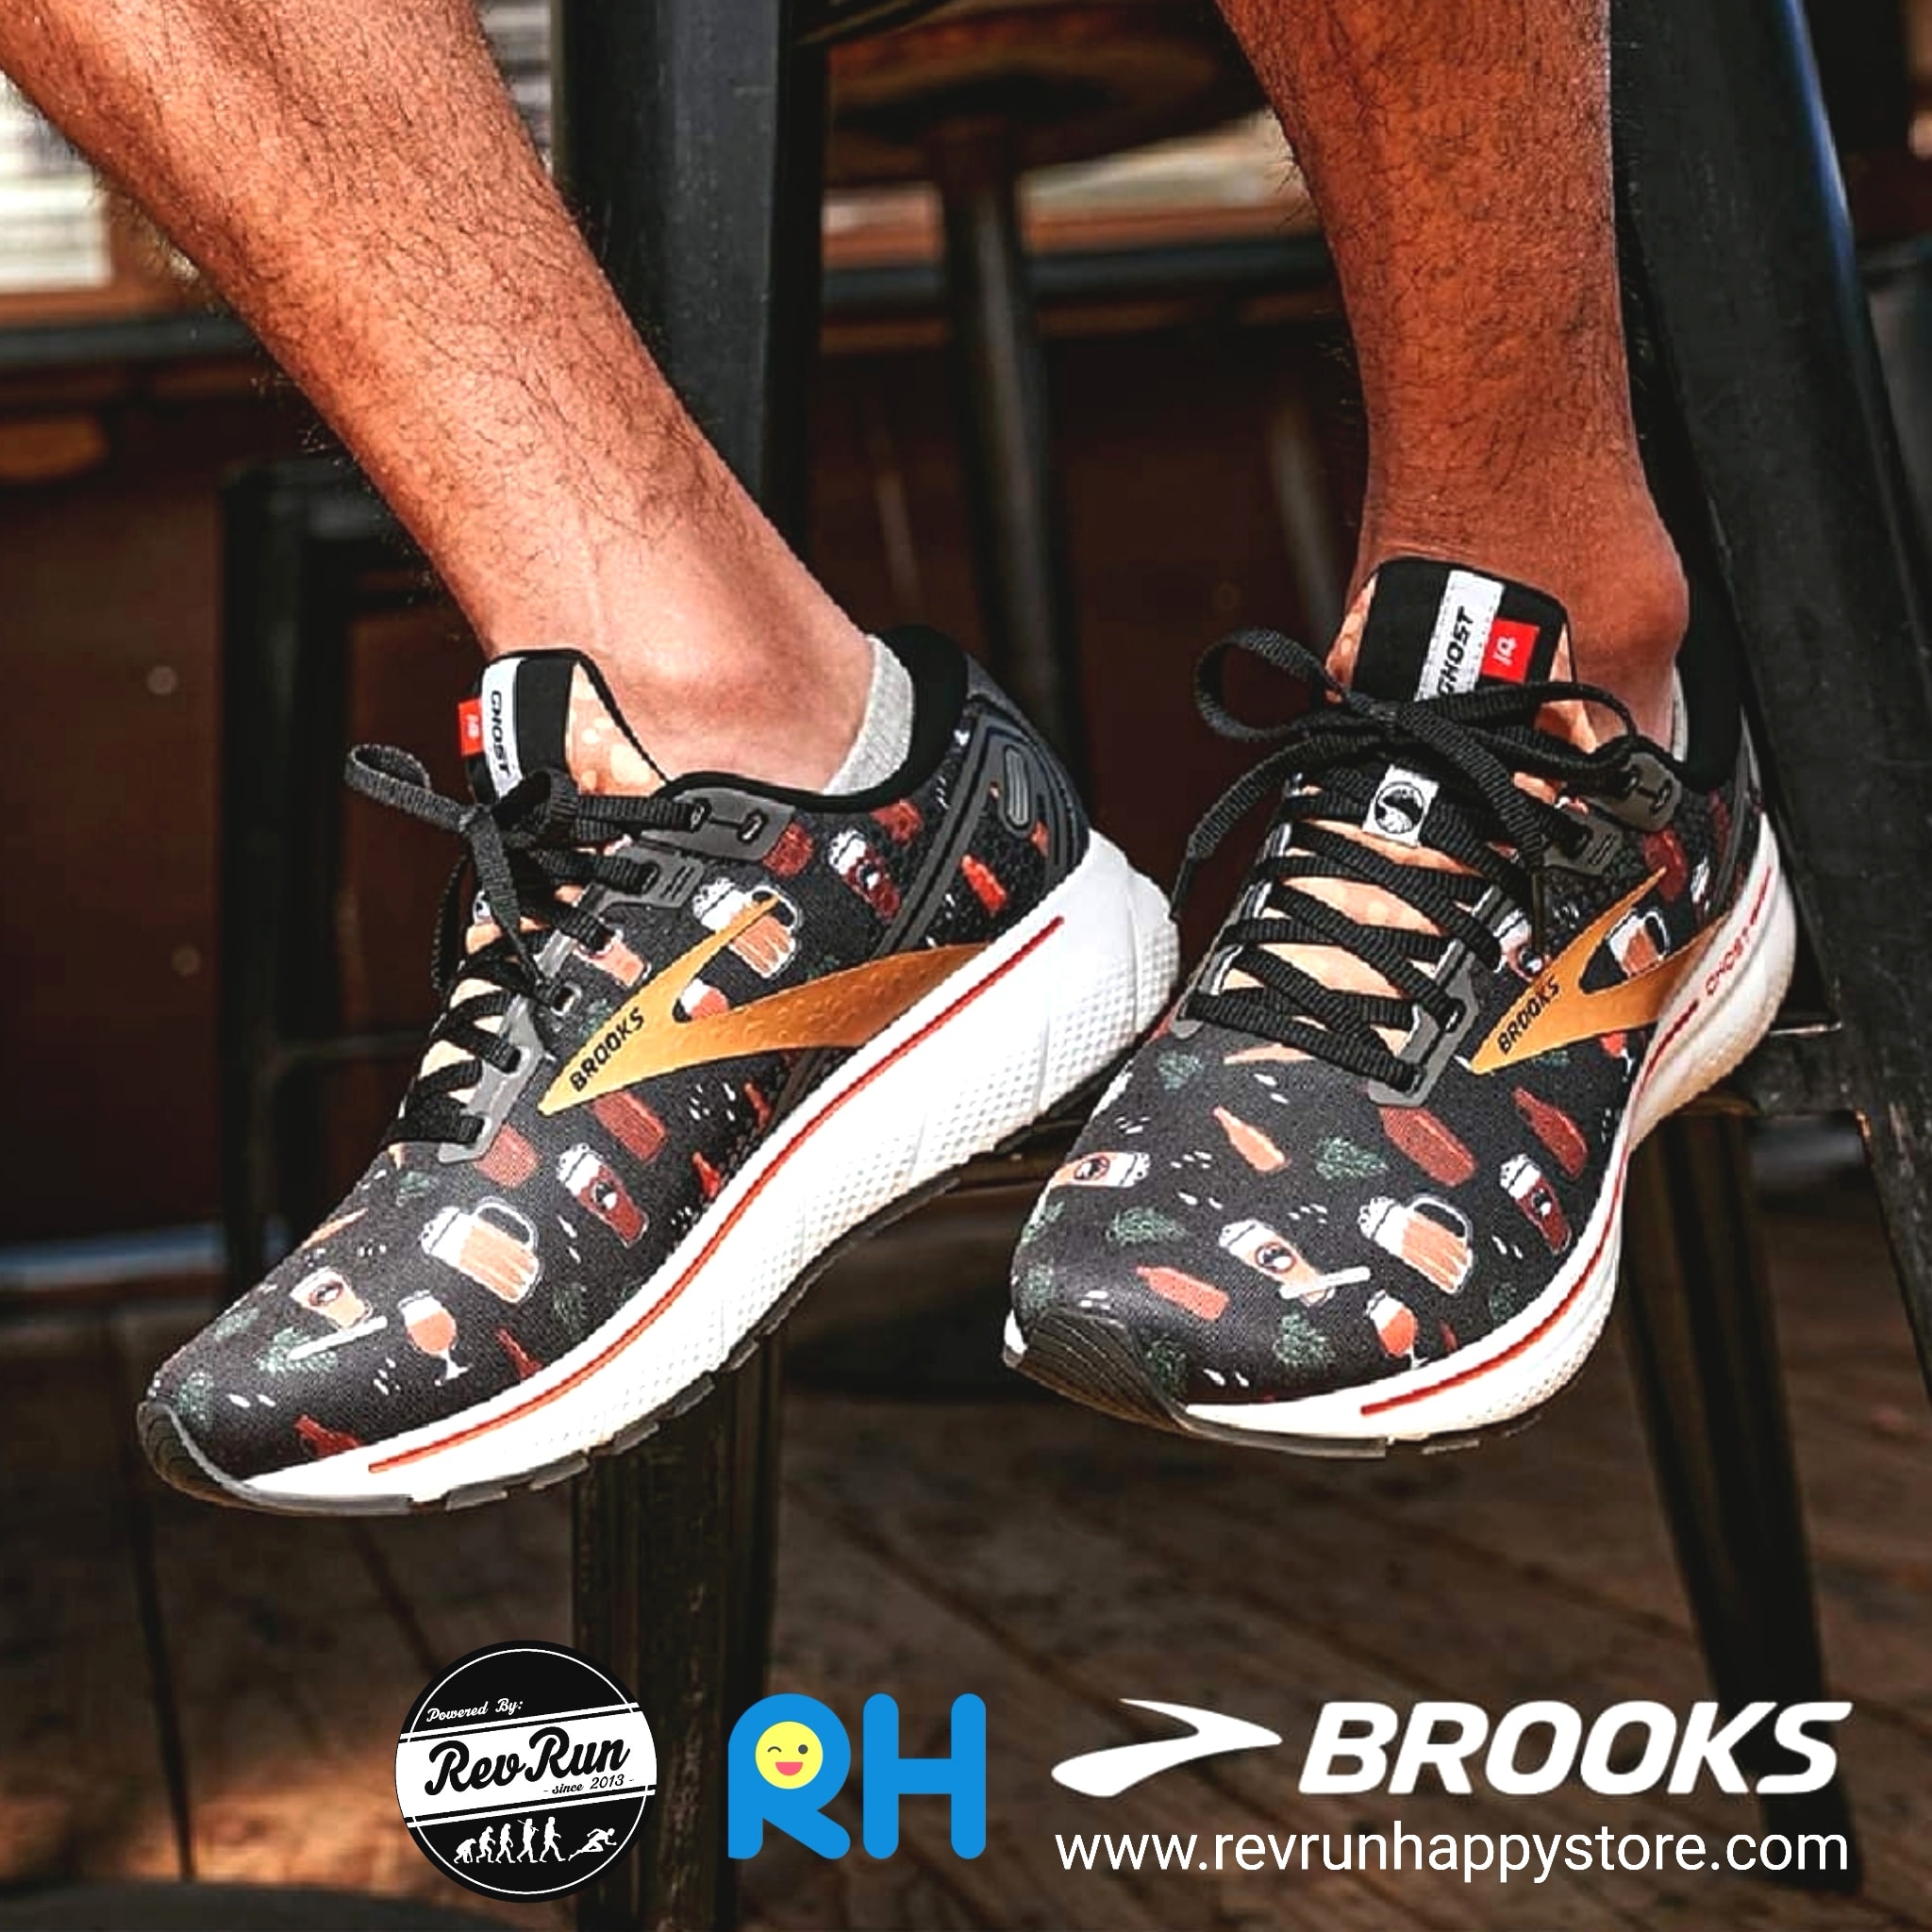 Brooks x Academy First Responder Collection Now Available